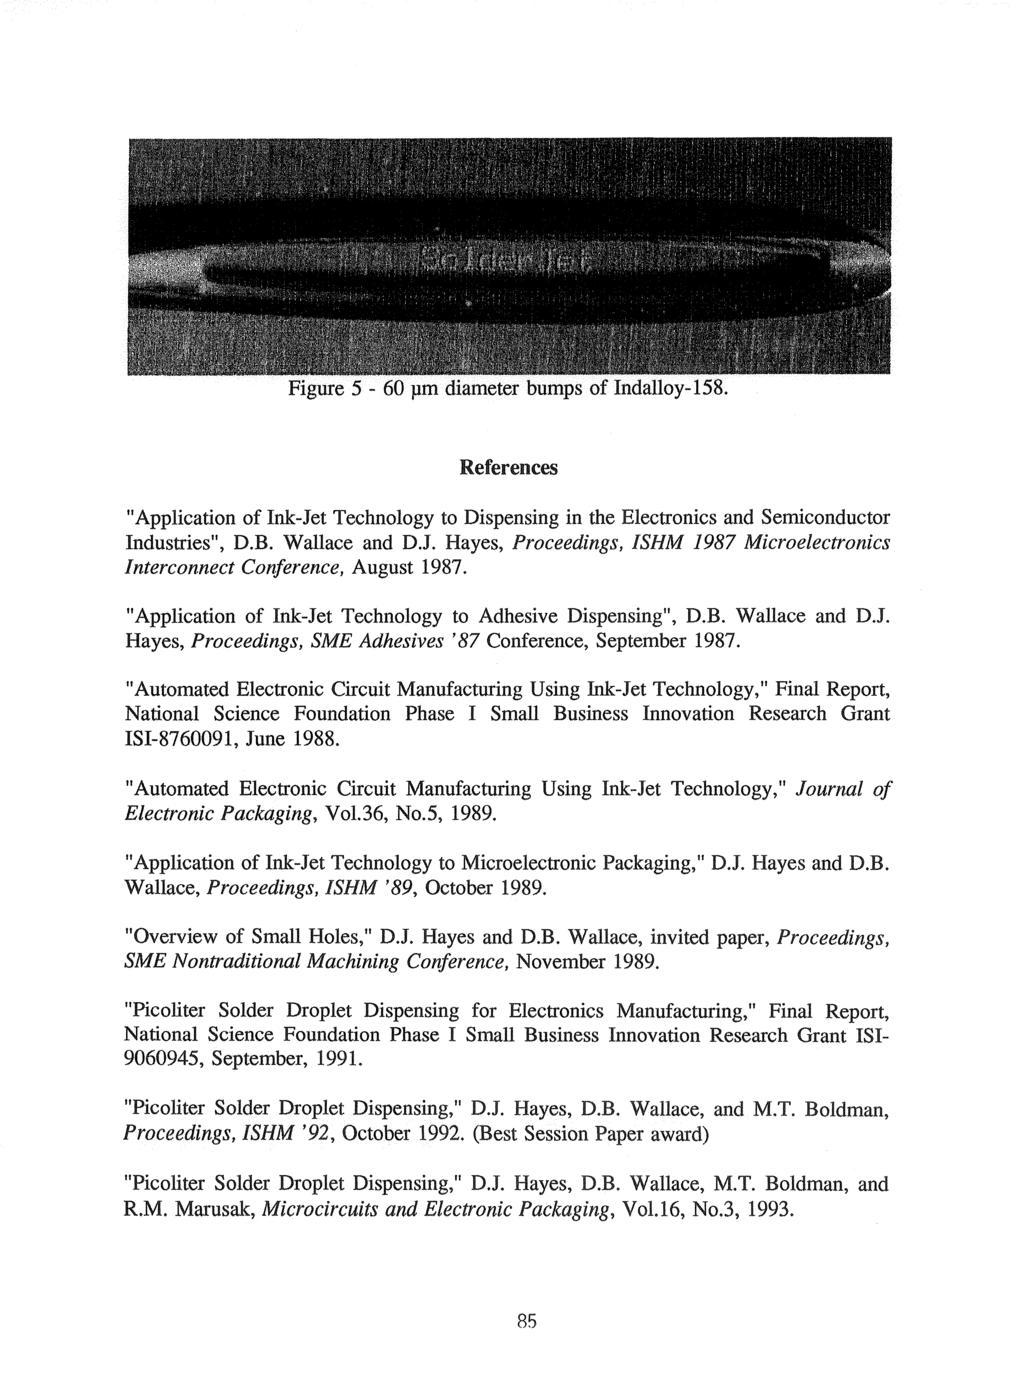 References "Application of Ink-Jet Technology to Dispensing the Electronics and Semiconductor Industries", D.B. Wallace and D.J. Hayes, Proceedings, ISHM 1987 Microelectronics Interconnect Conference, August 1987.